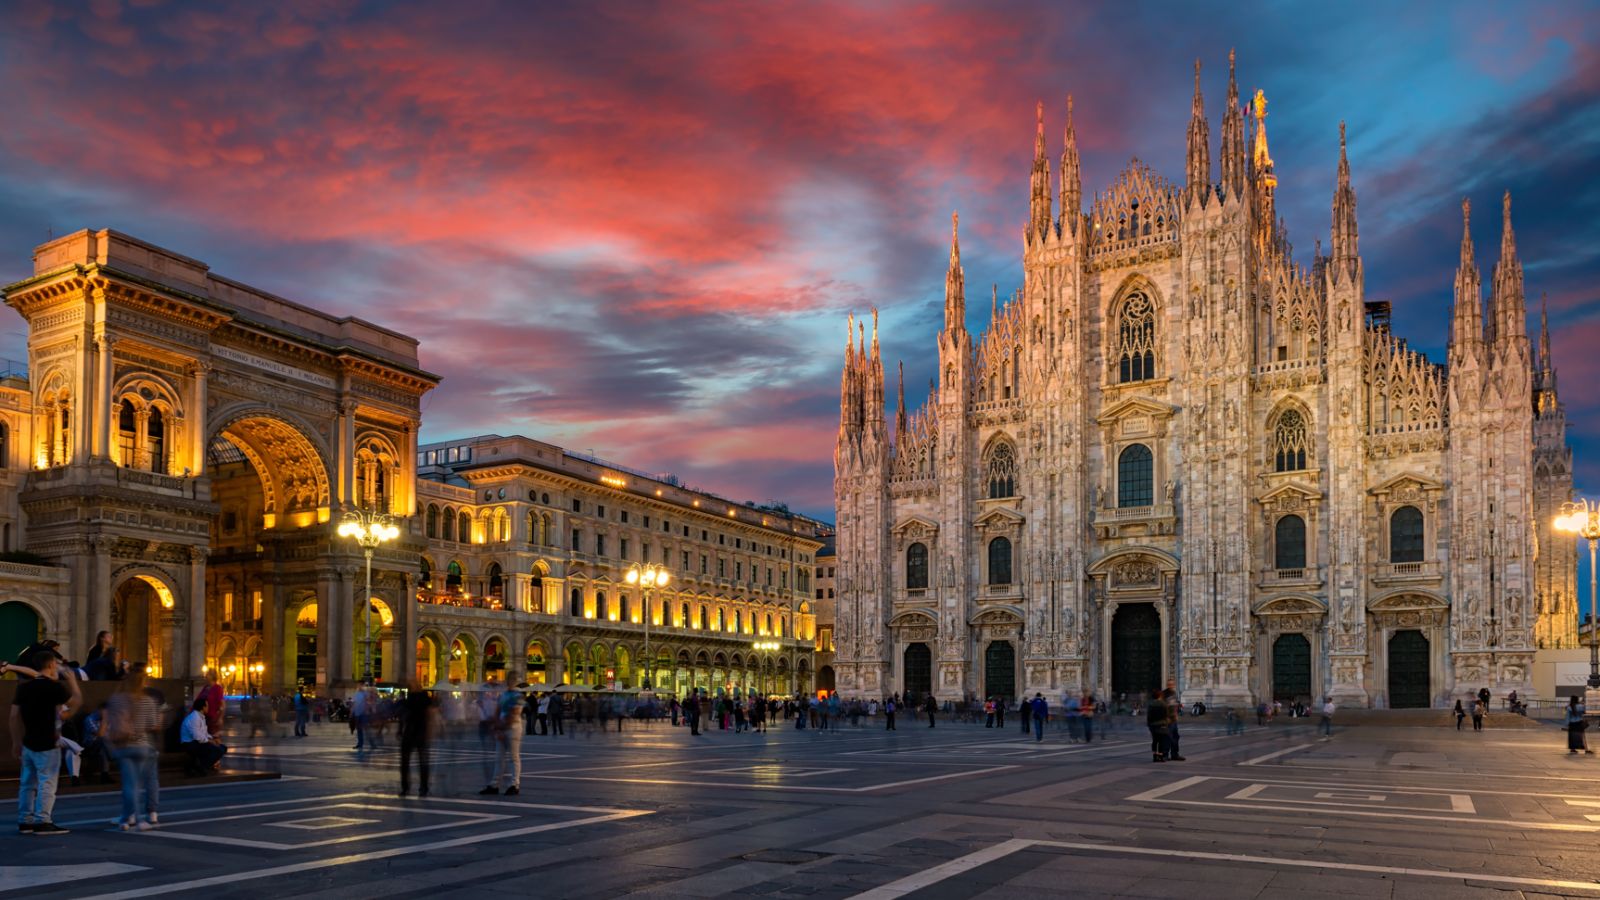 <p>The cathedral’s official name is Duomo di Milano, and it is a magnificent example of Italian Gothic architecture. <a href="https://www.tickets-milan.com/duomo-milan/opening-hours/">Milan Tickets</a> says, “It is one of the largest cathedrals in Europe and gets hundreds of tourists every day.” Many come to admire its intricate details, ancient statues, and the breathtaking view from its rooftop.</p>